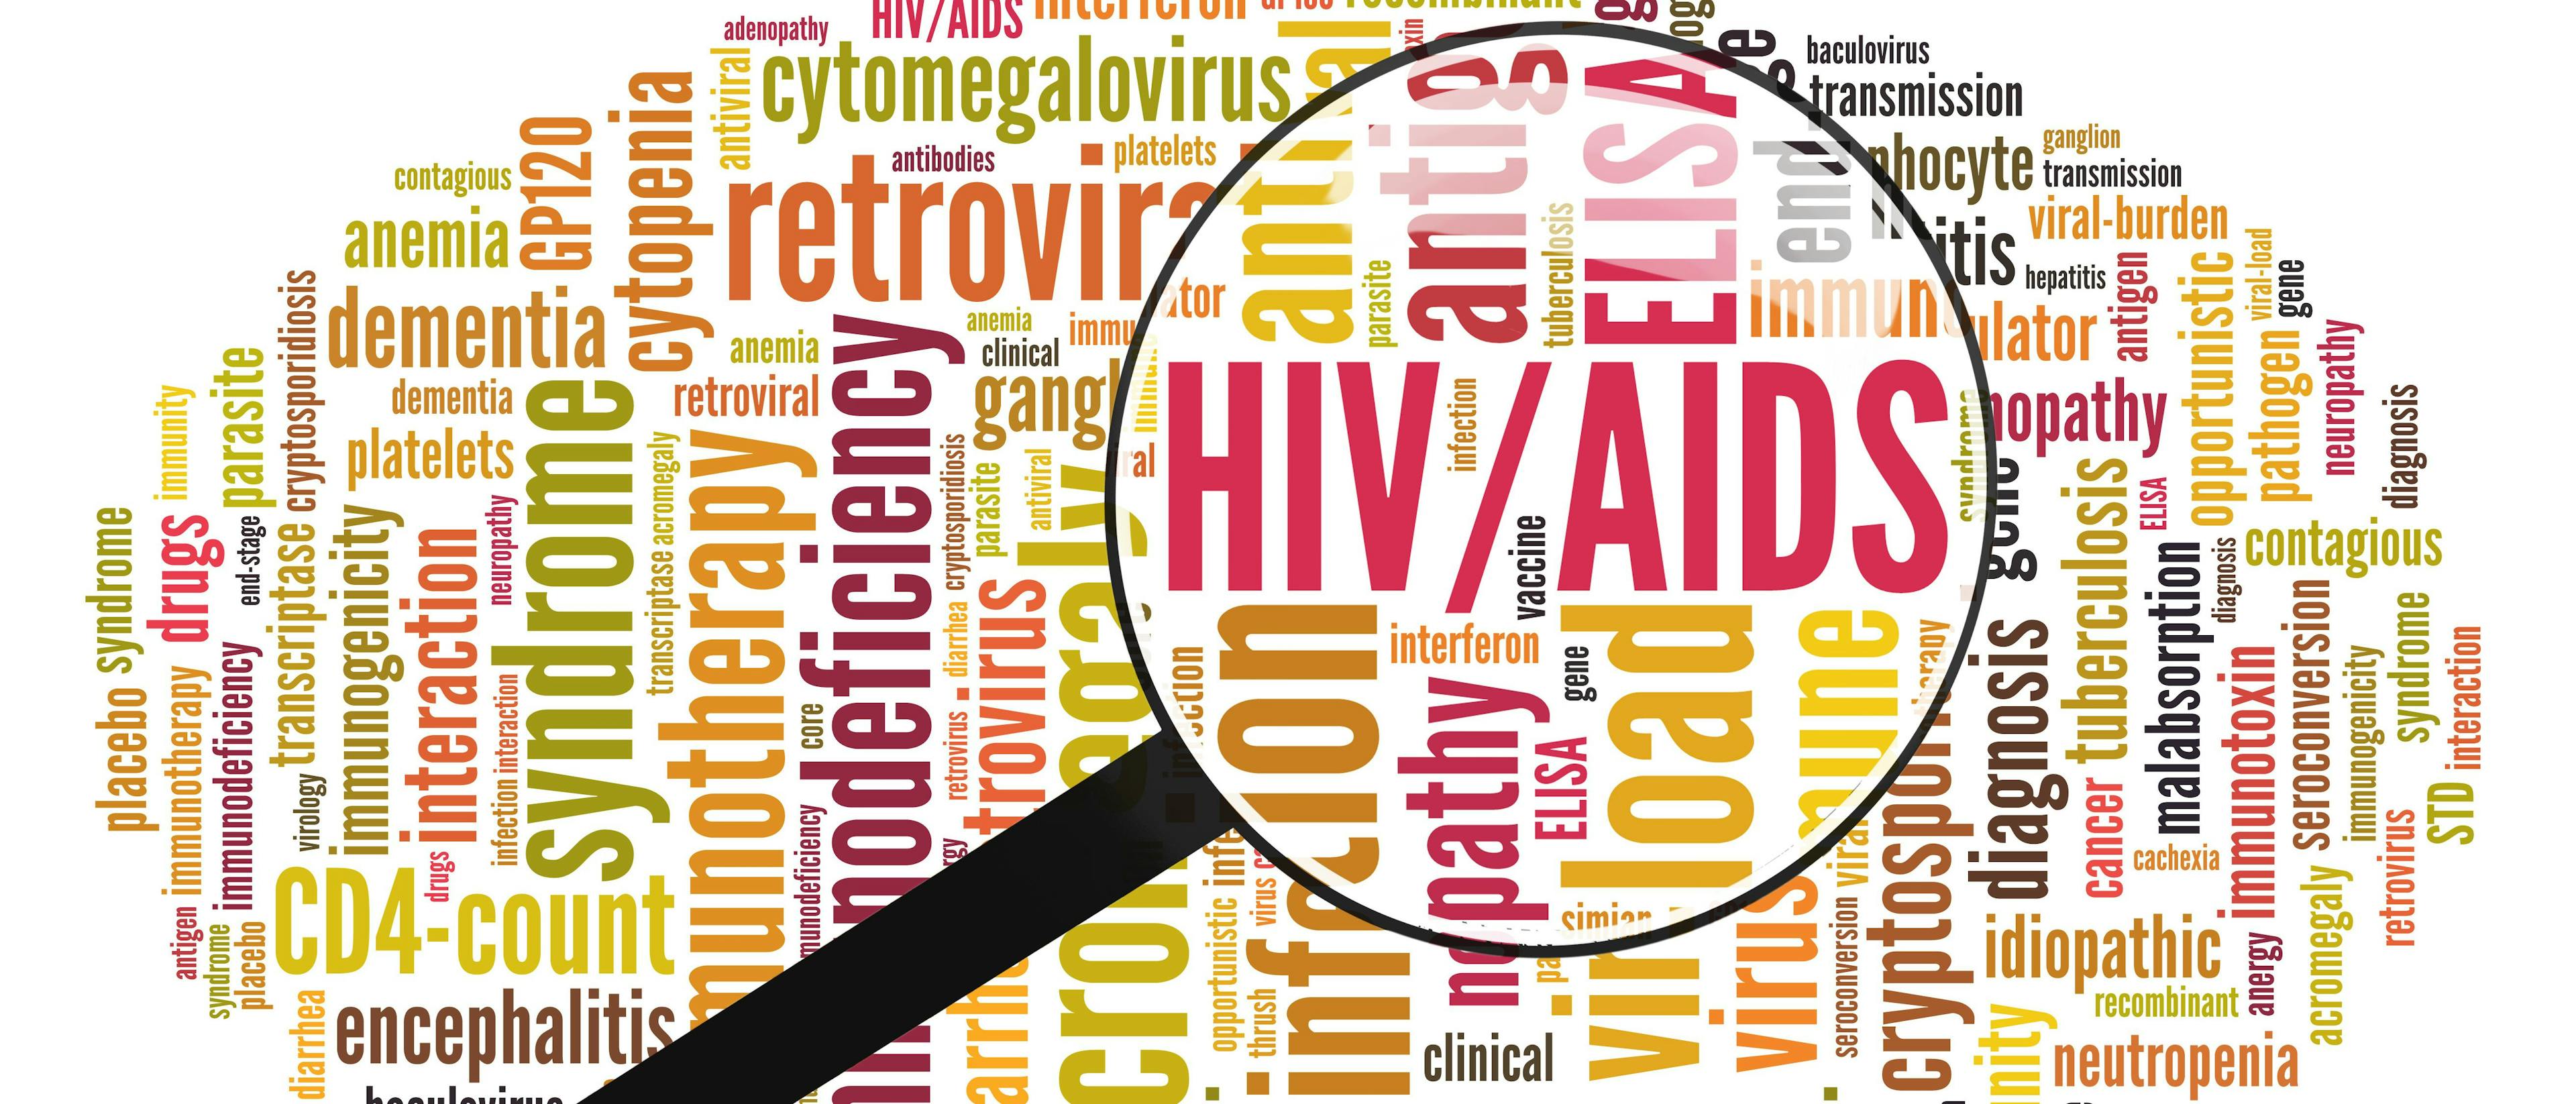 HAART: What's Best in Treatment-Naive HIV Patients?